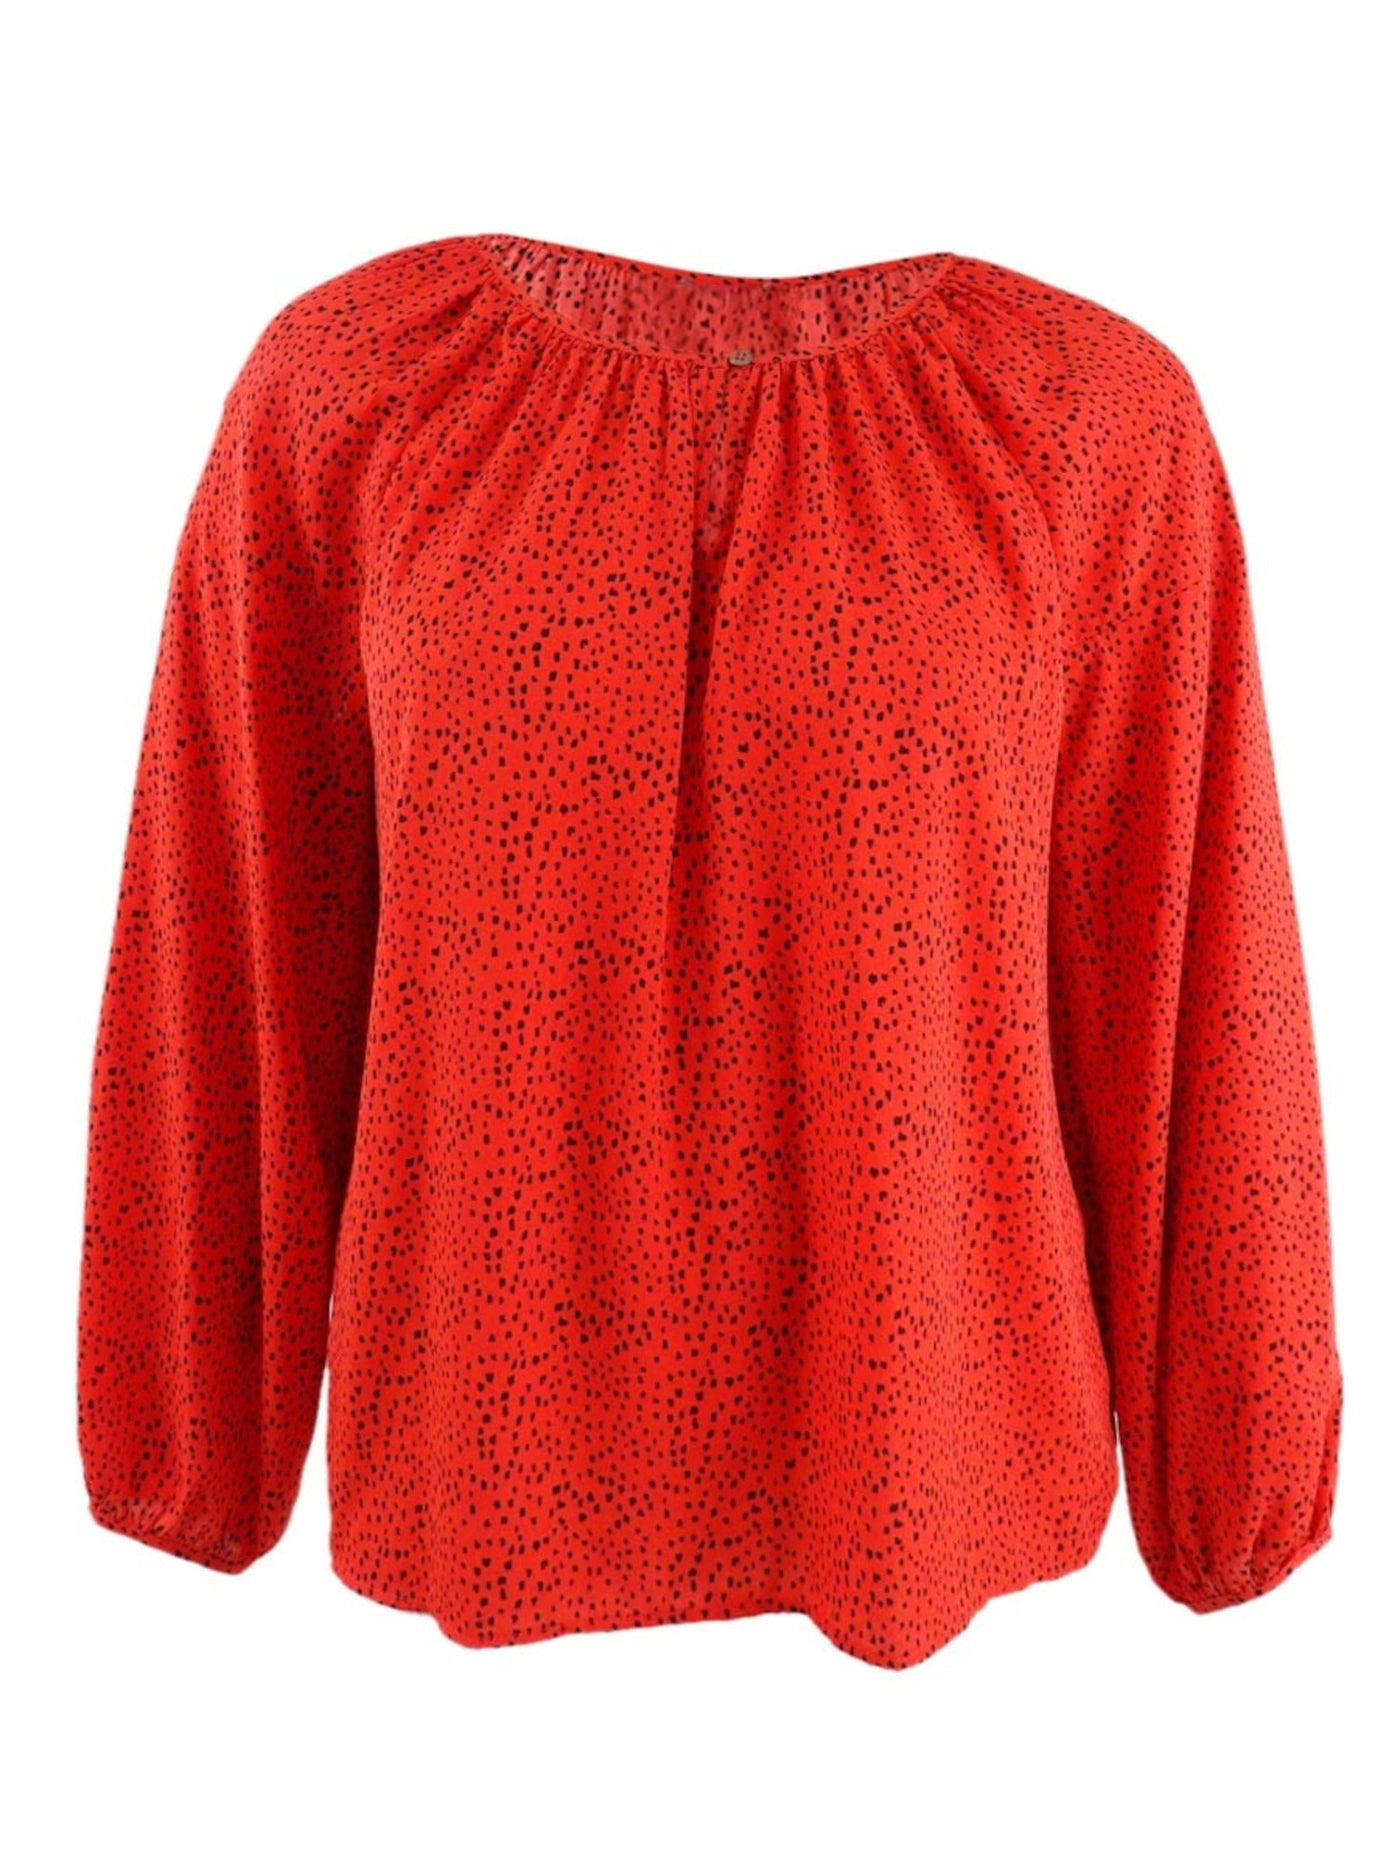 VINCE CAMUTO Womens Orange Gathered Unlined Drop Shoulders Pullover Polka Dot 3/4 Sleeve Keyhole Wear To Work Peasant Top XS